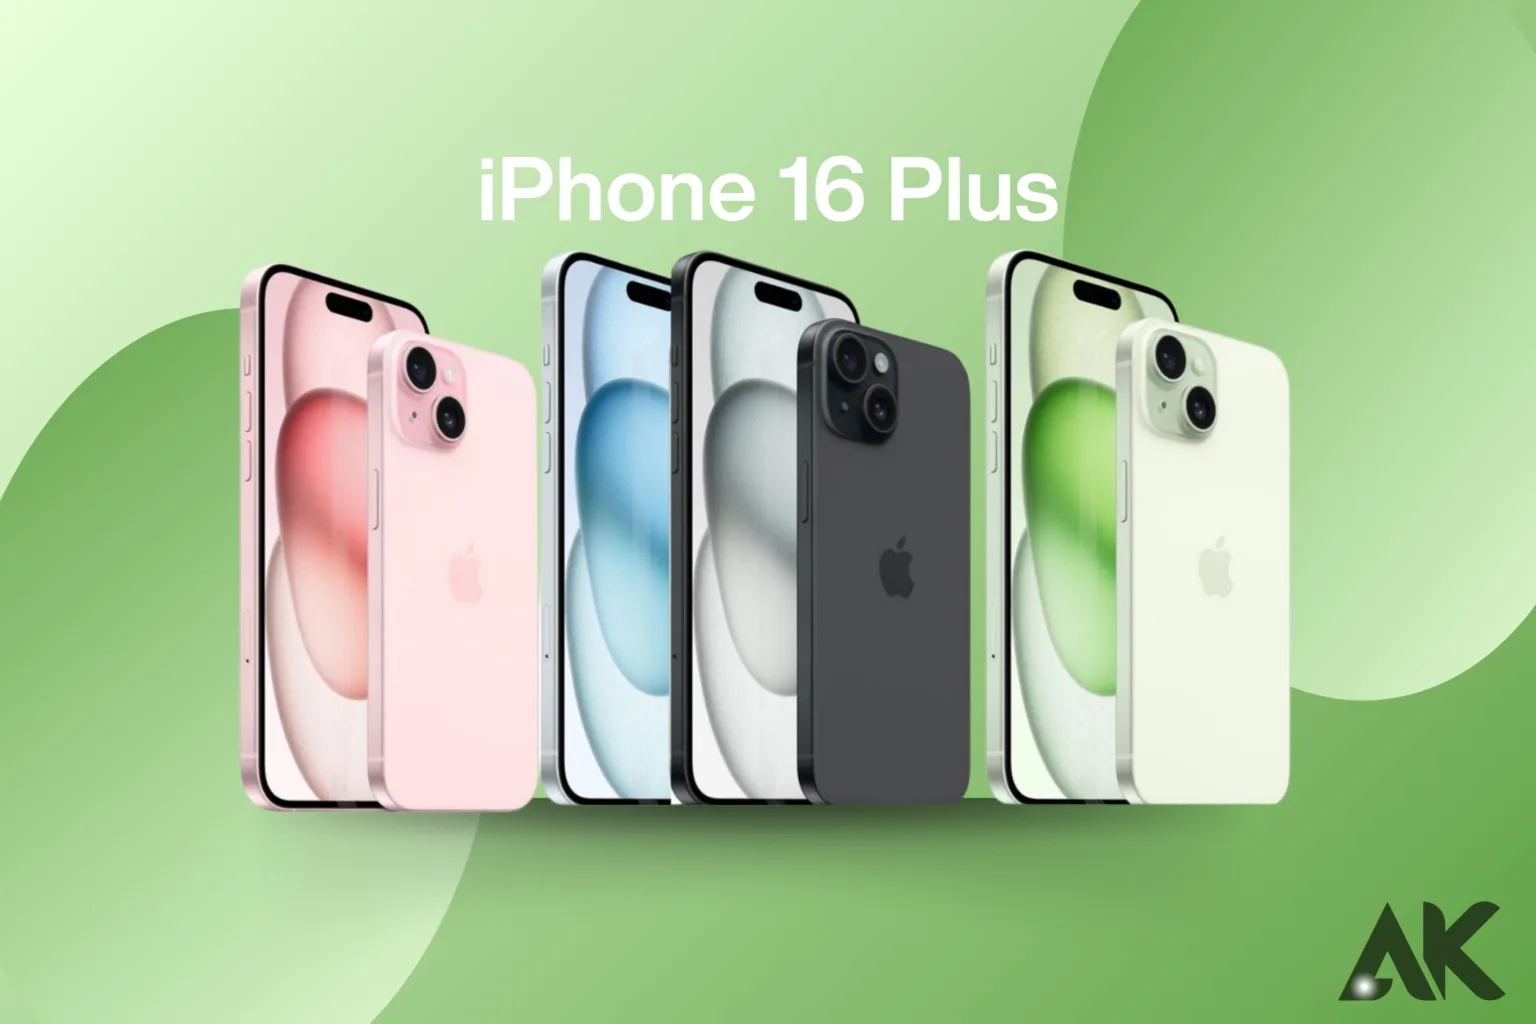 Vivid Visuals The Stunning Display of the iPhone 16 Plus